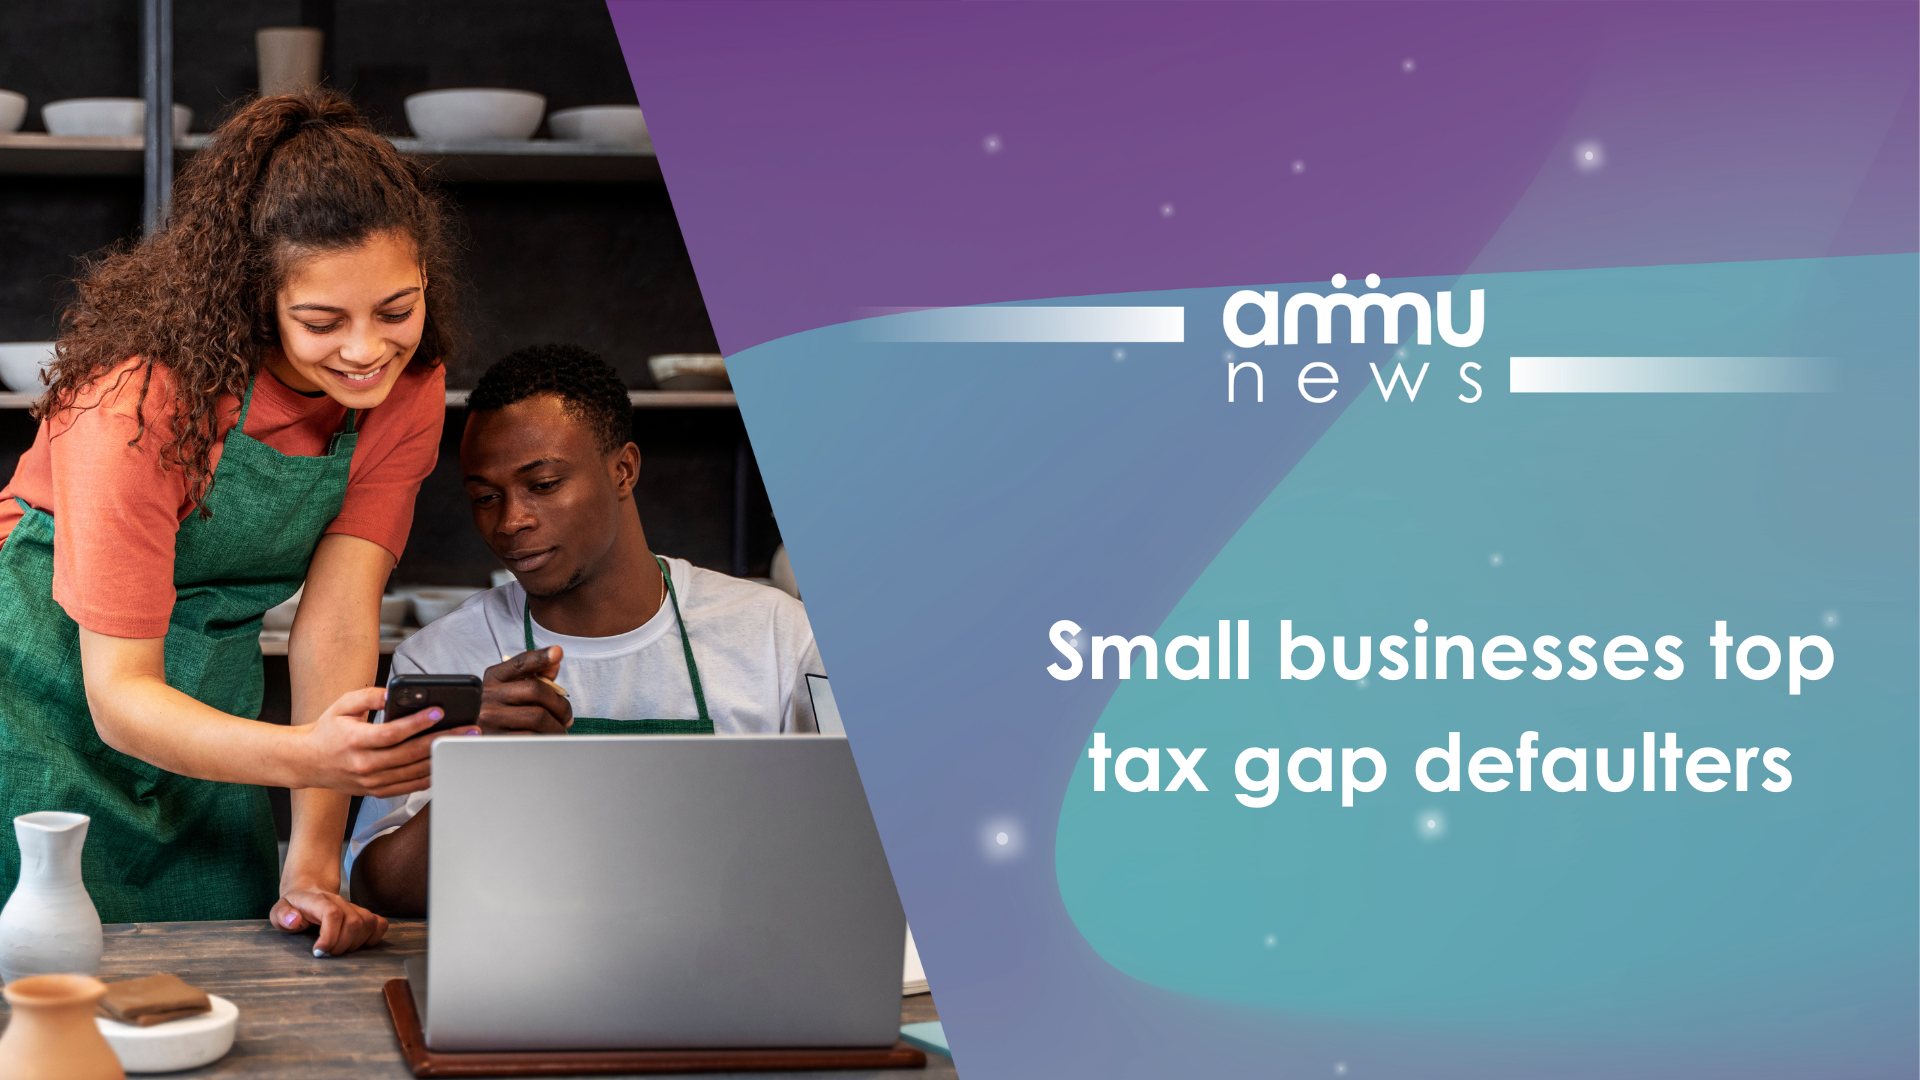 Small businesses top tax gap defaulters